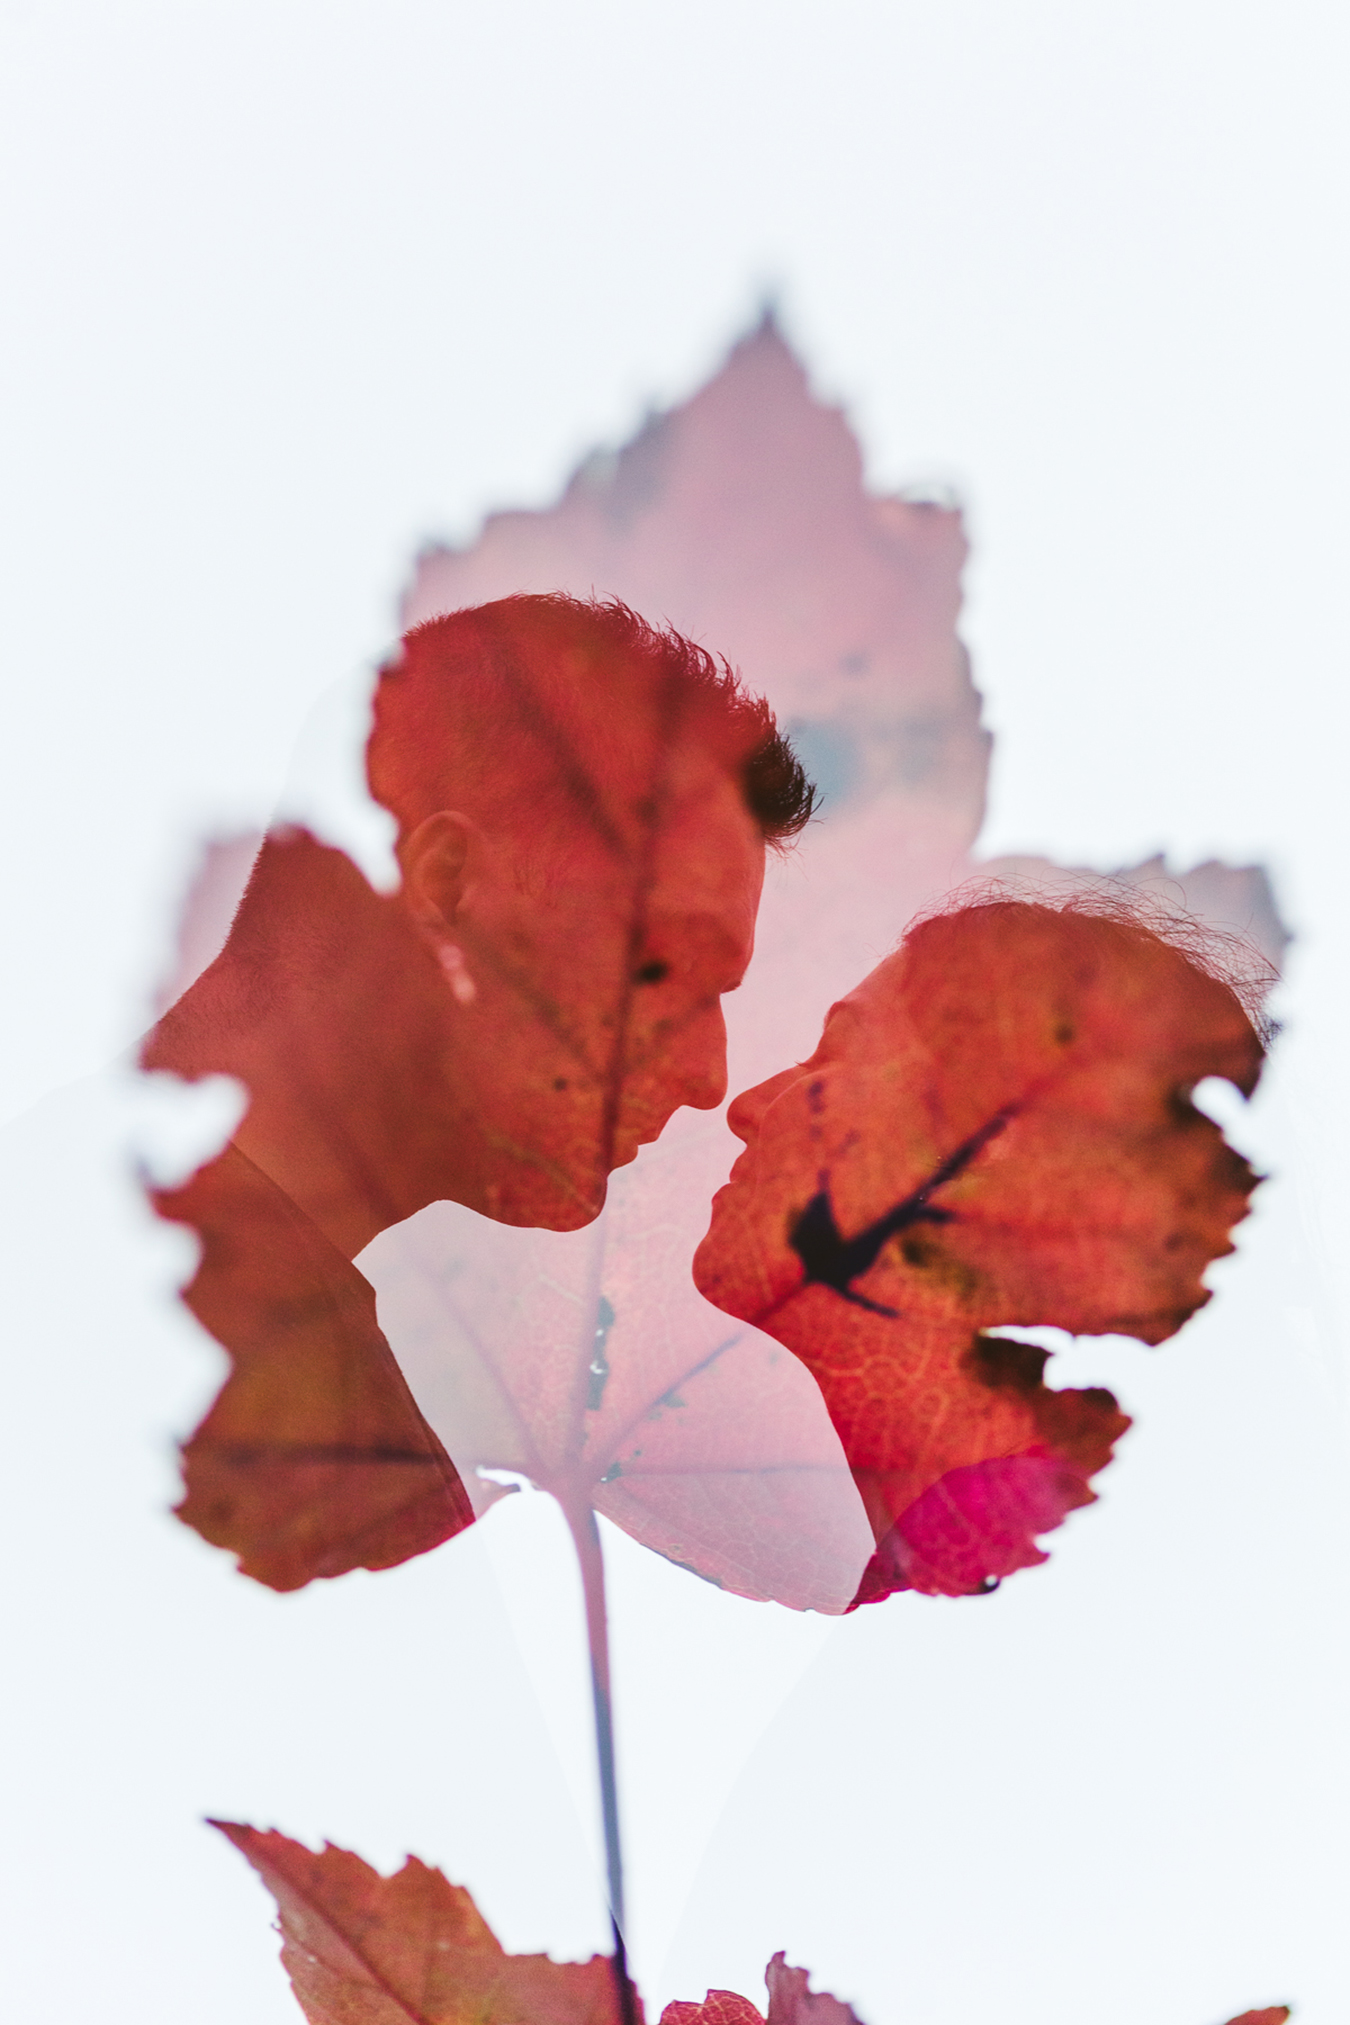 double exposure with a maple leaf